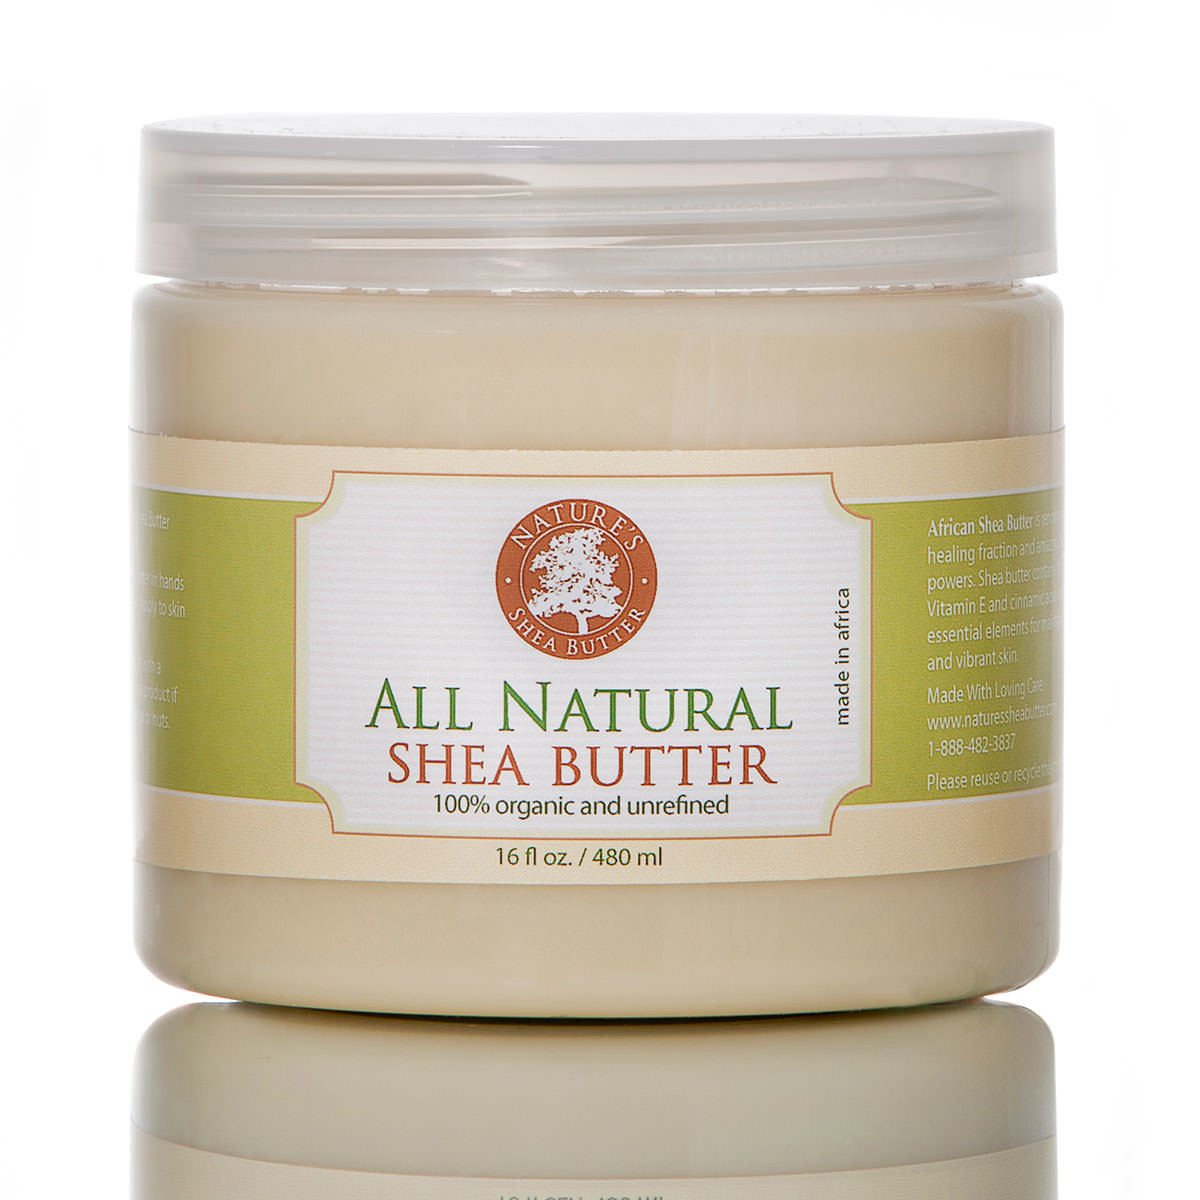 West African Shea Butter (Ivory)